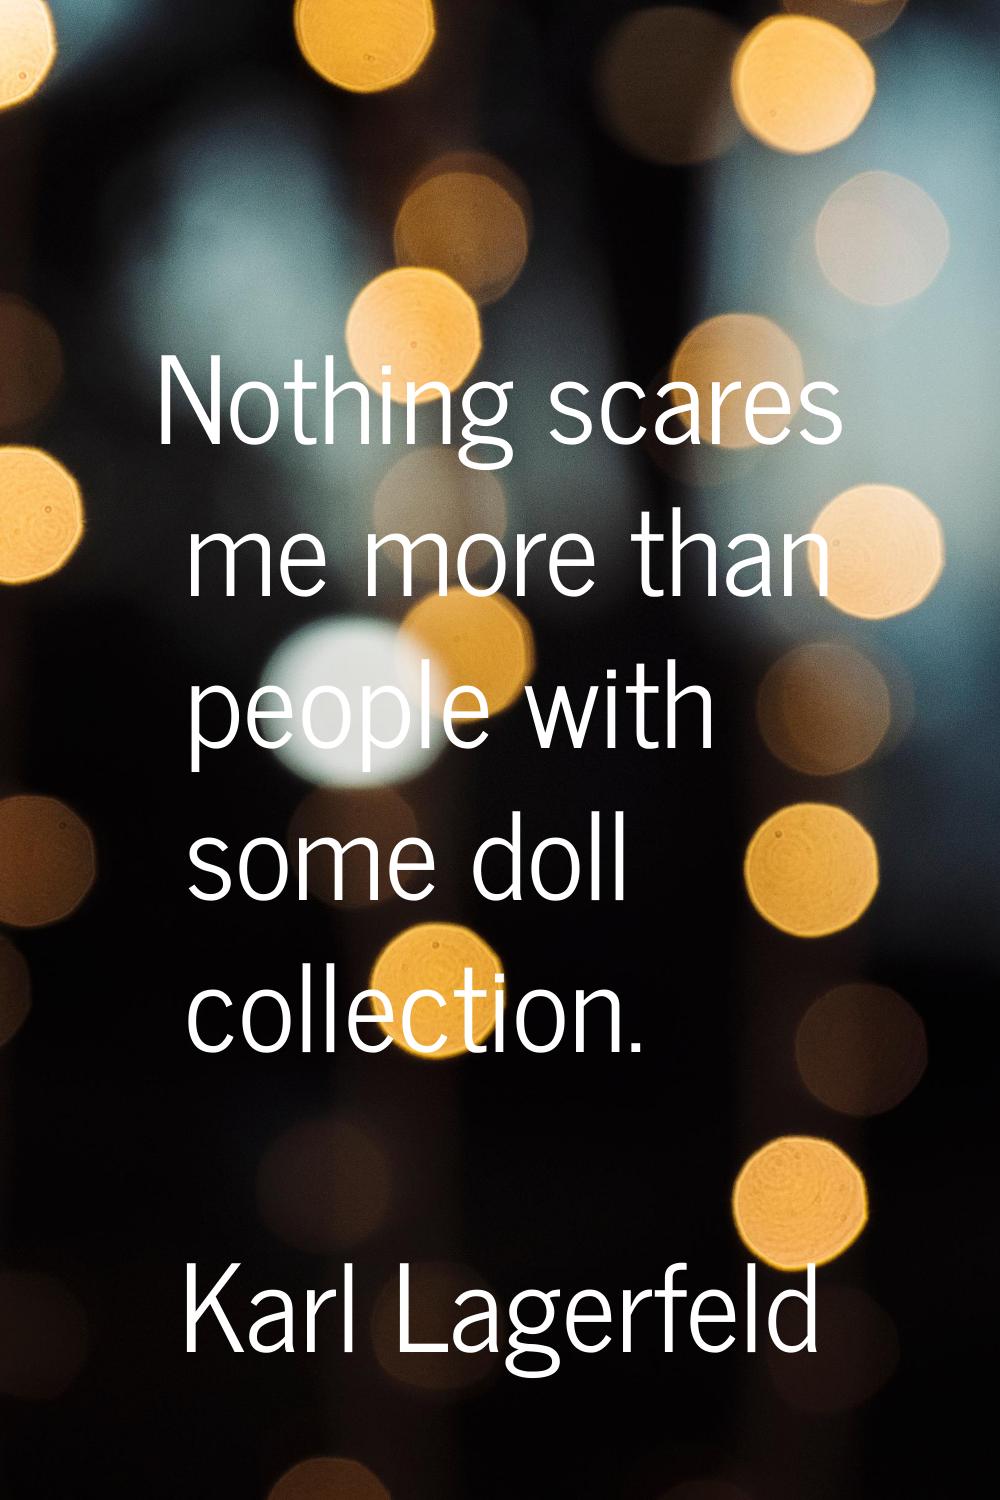 Nothing scares me more than people with some doll collection.